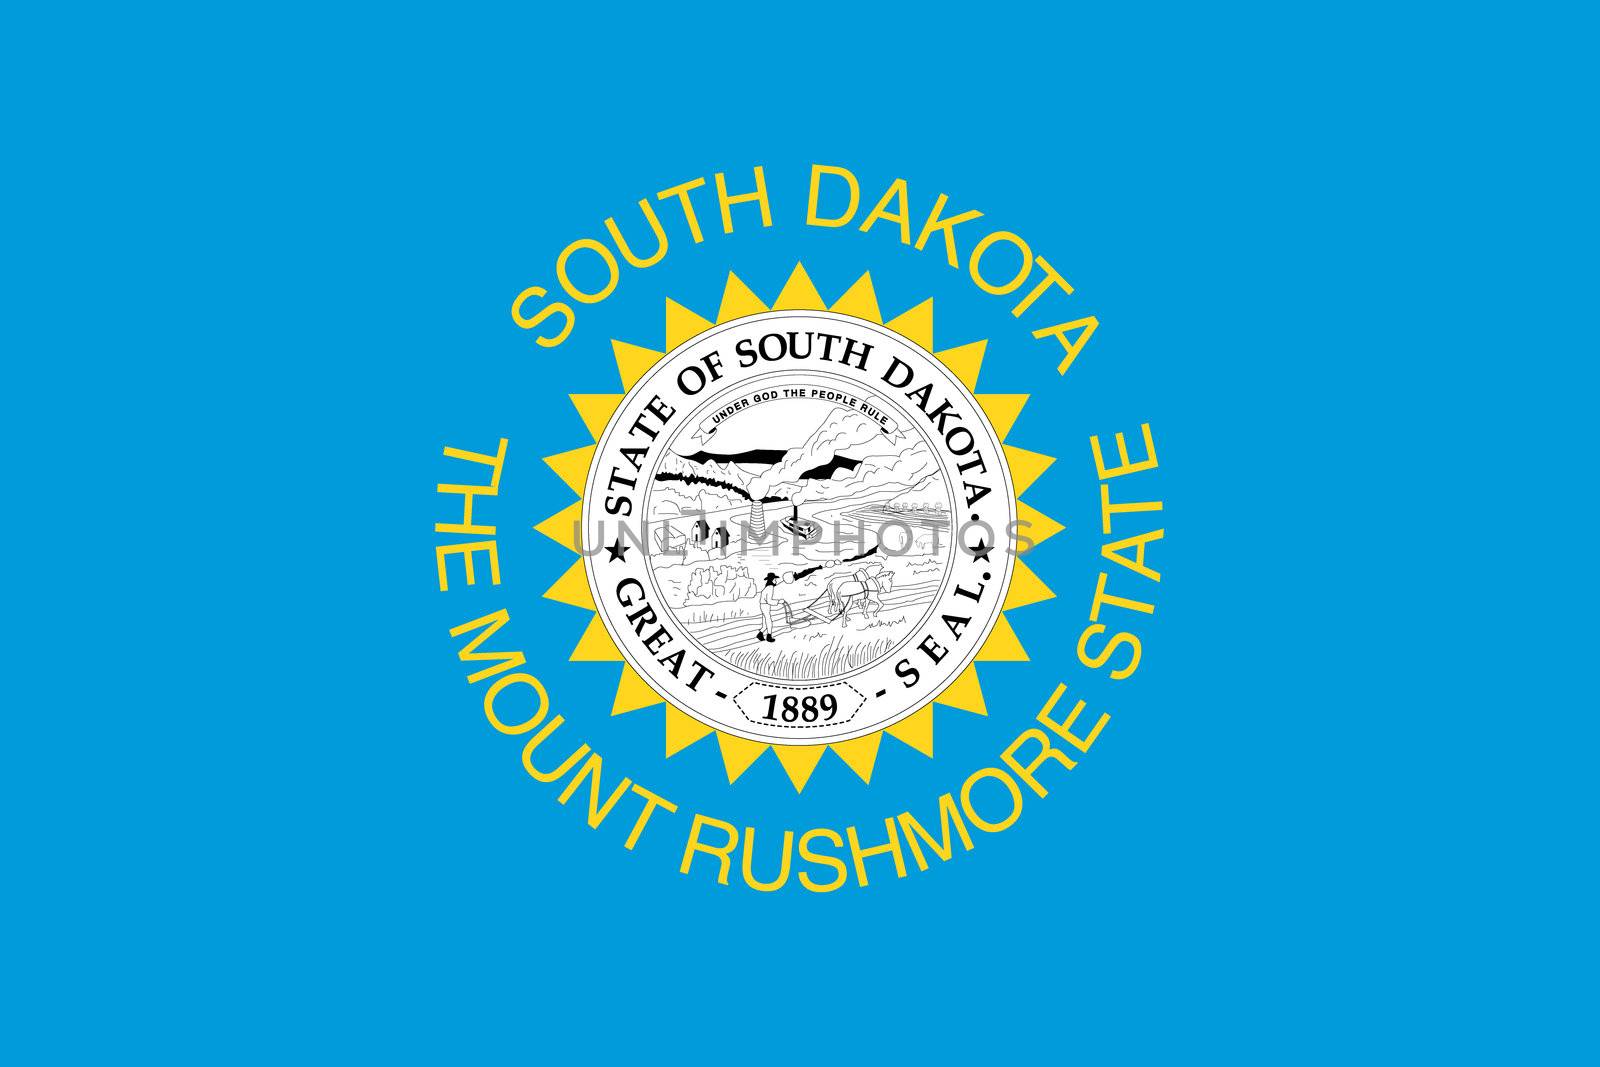 The Flag of the American State of South Dakota